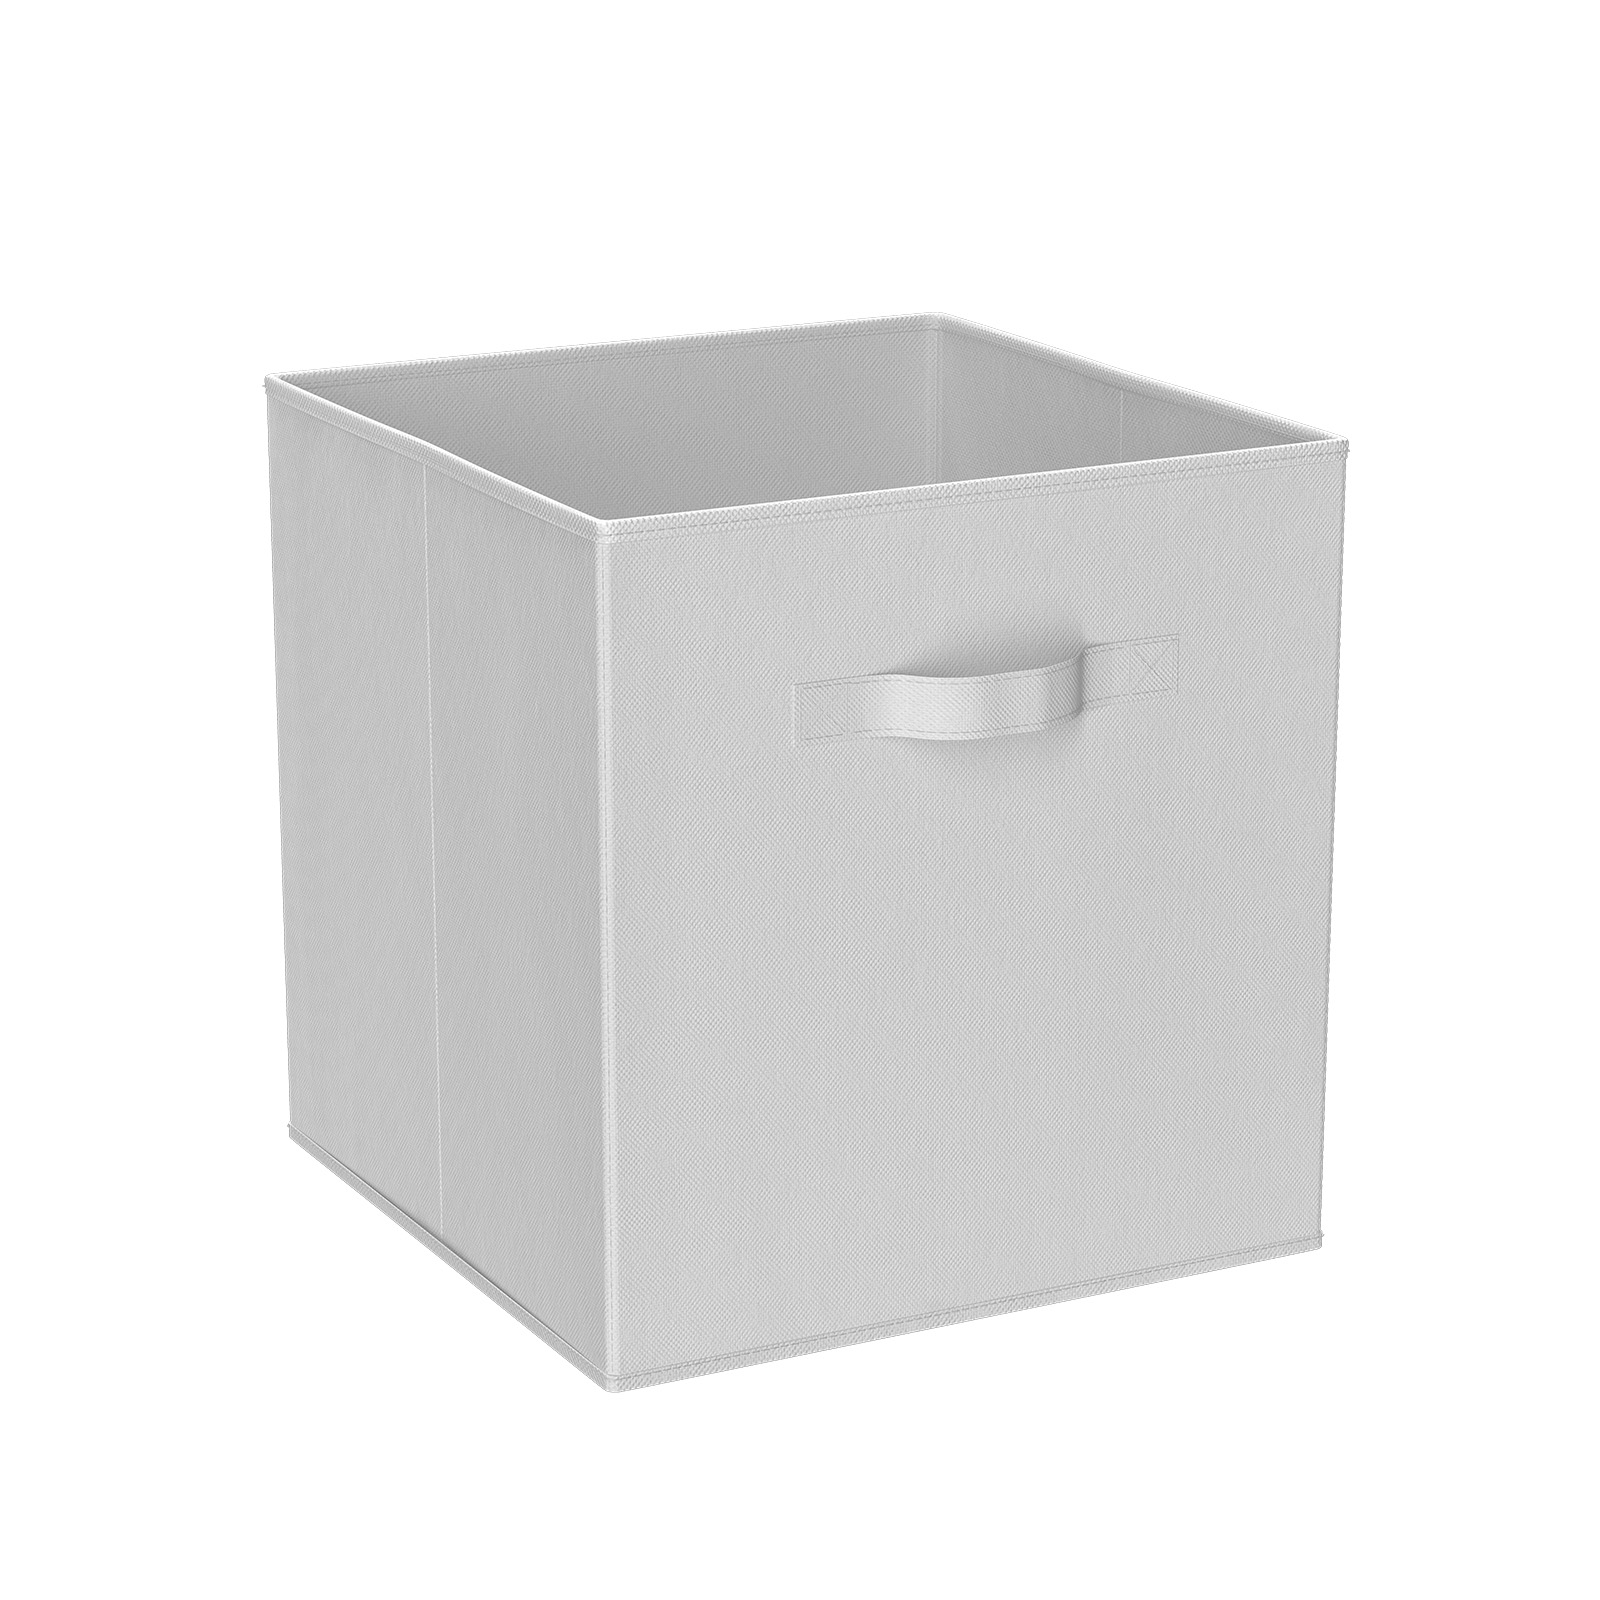 Clever Cube Compact Fabric Insert White